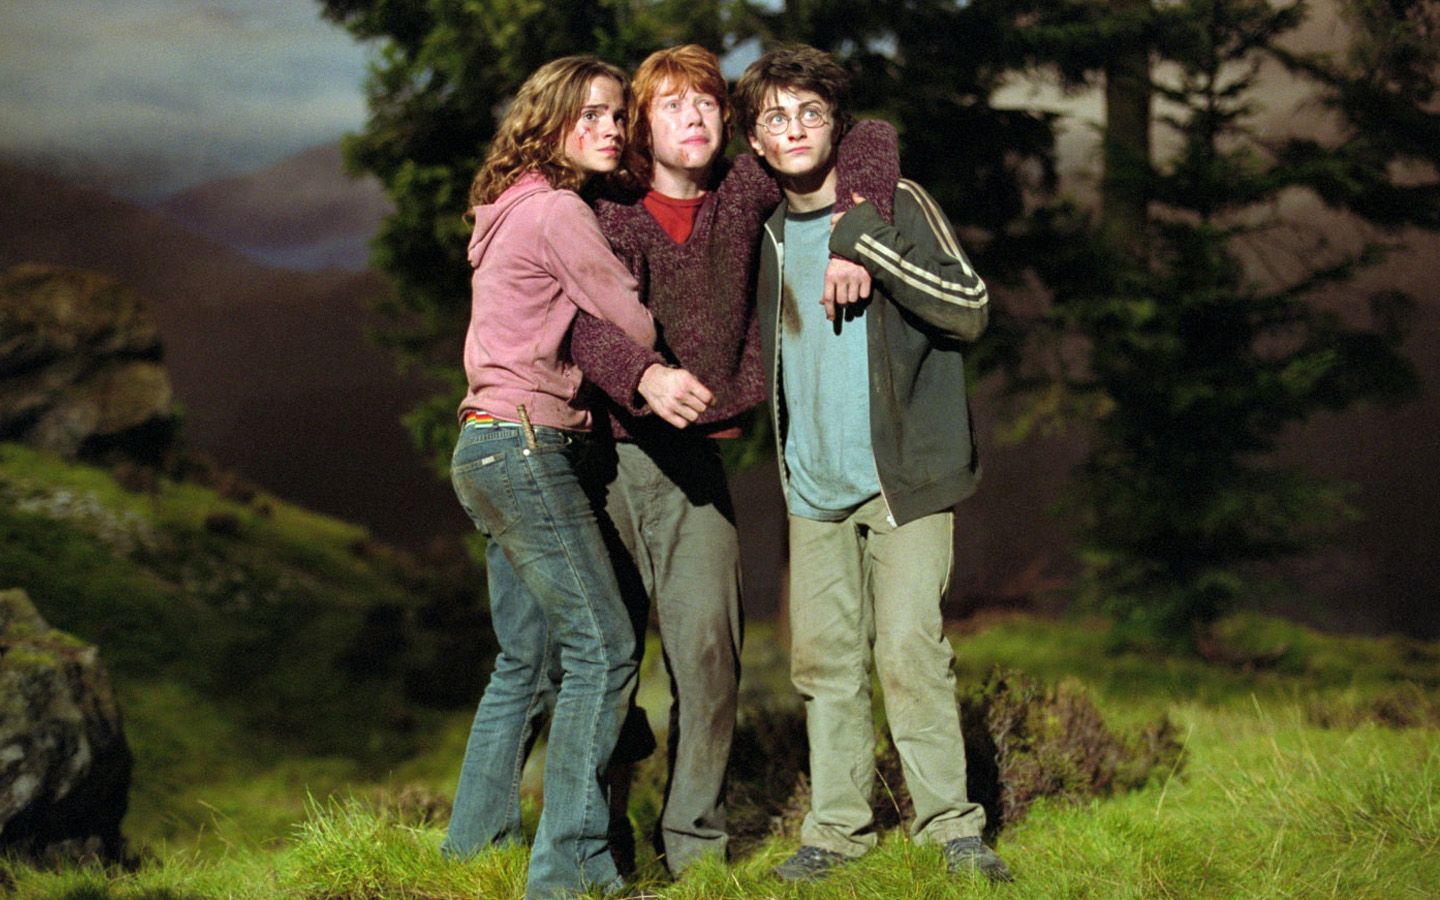 emma watson with other crew in harry potter widescreen.jpg